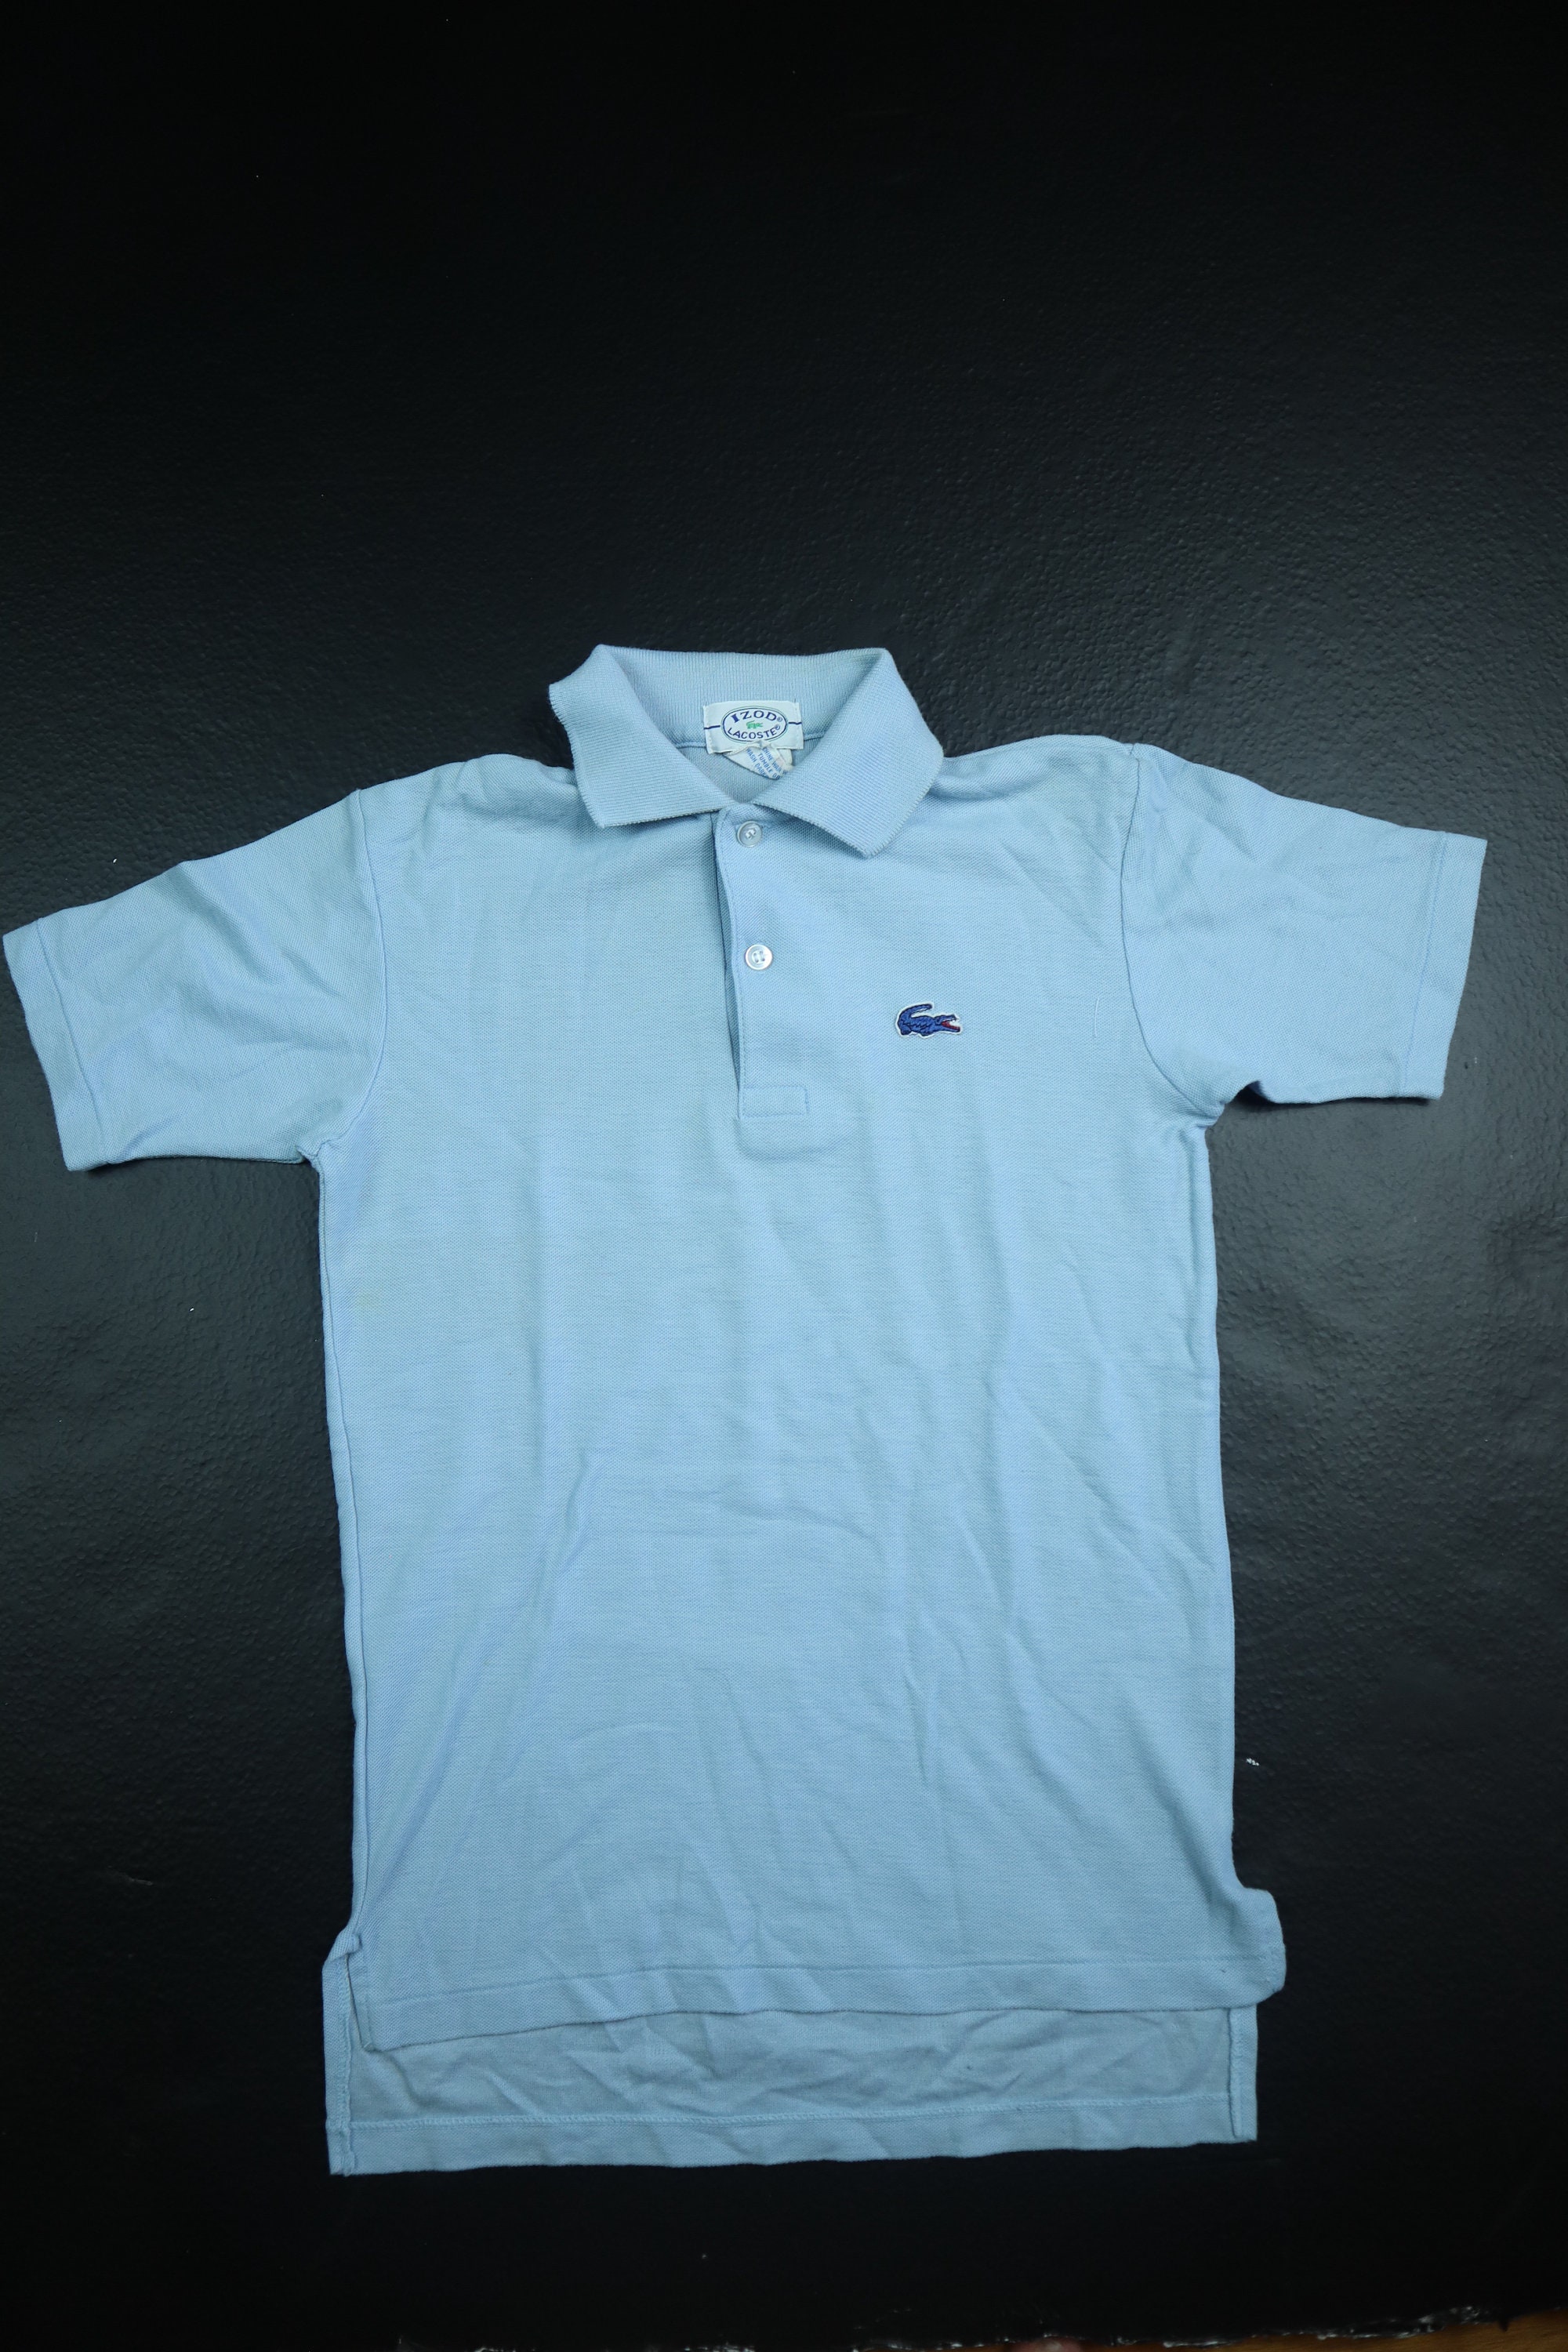 Lacoste / Izod Made in Japan vintage polo Tshirt